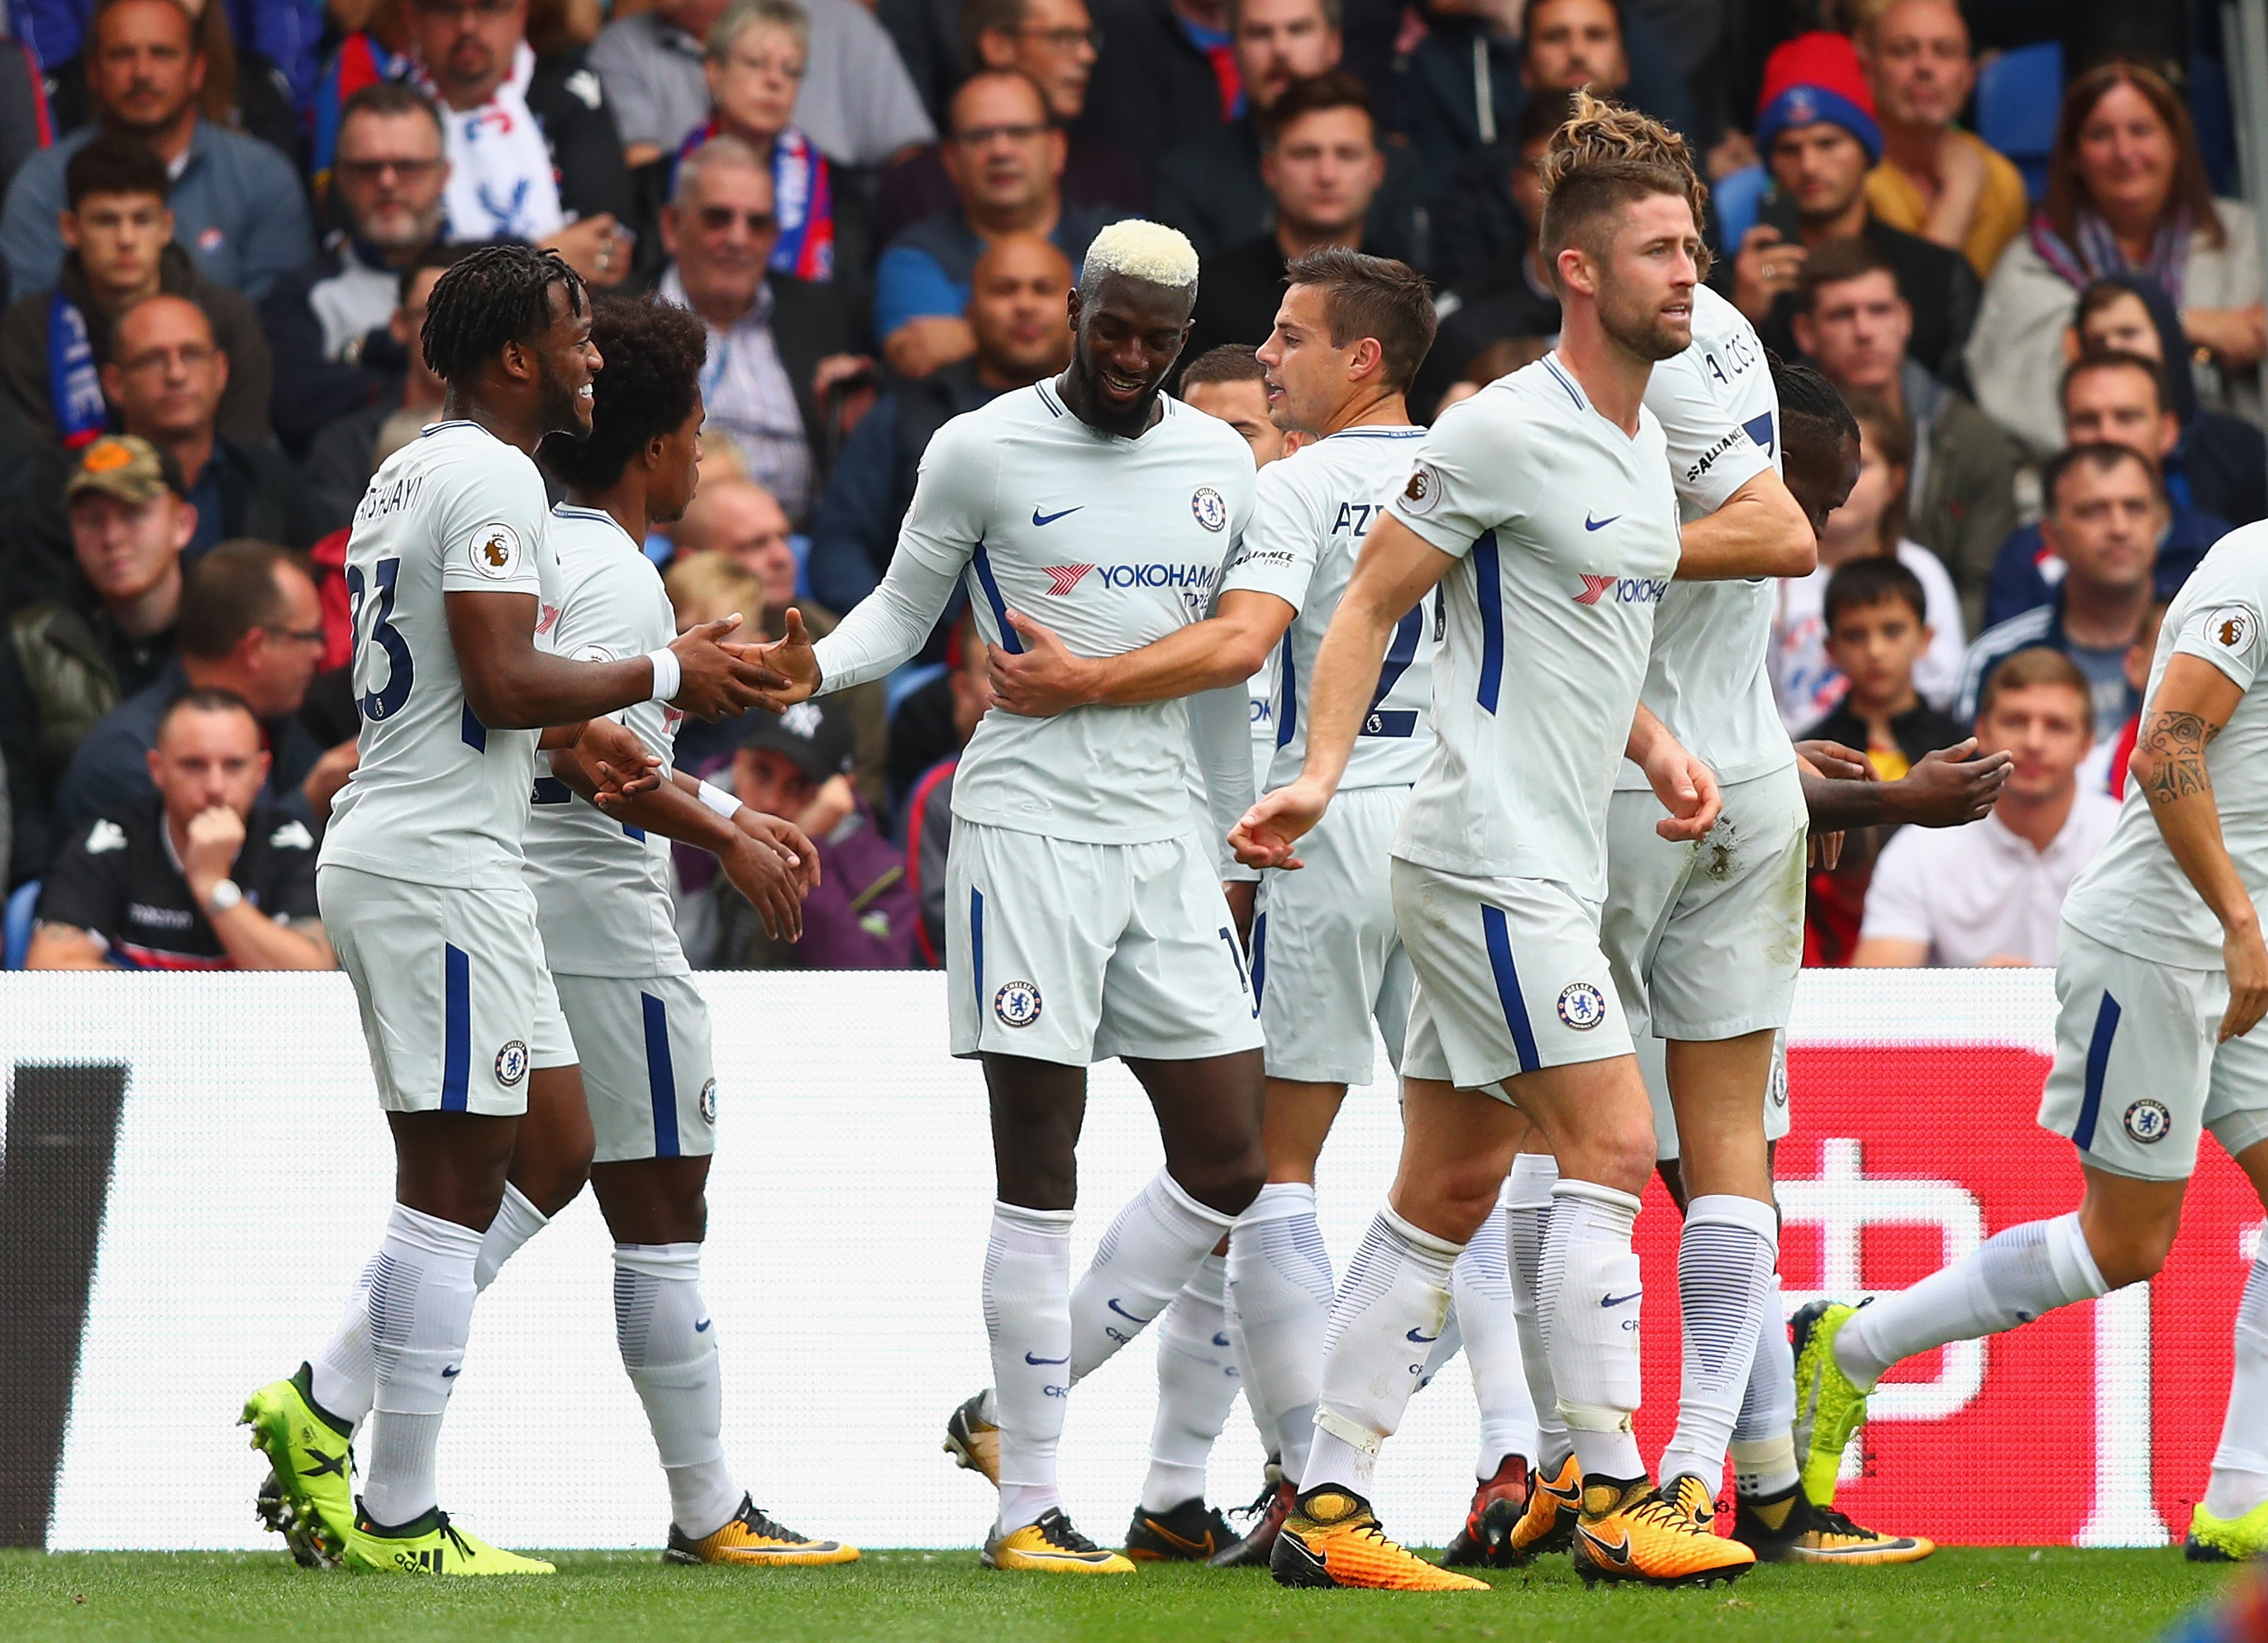 LONDON, ENGLAND - OCTOBER 14: Tiemoue Bakayoko of Chelsea celebrates scoring his sides first goal with his Chelsea team mates during the Premier League match between Crystal Palace and Chelsea at Selhurst Park on October 14, 2017 in London, England.  (Photo by Clive Rose/Getty Images)